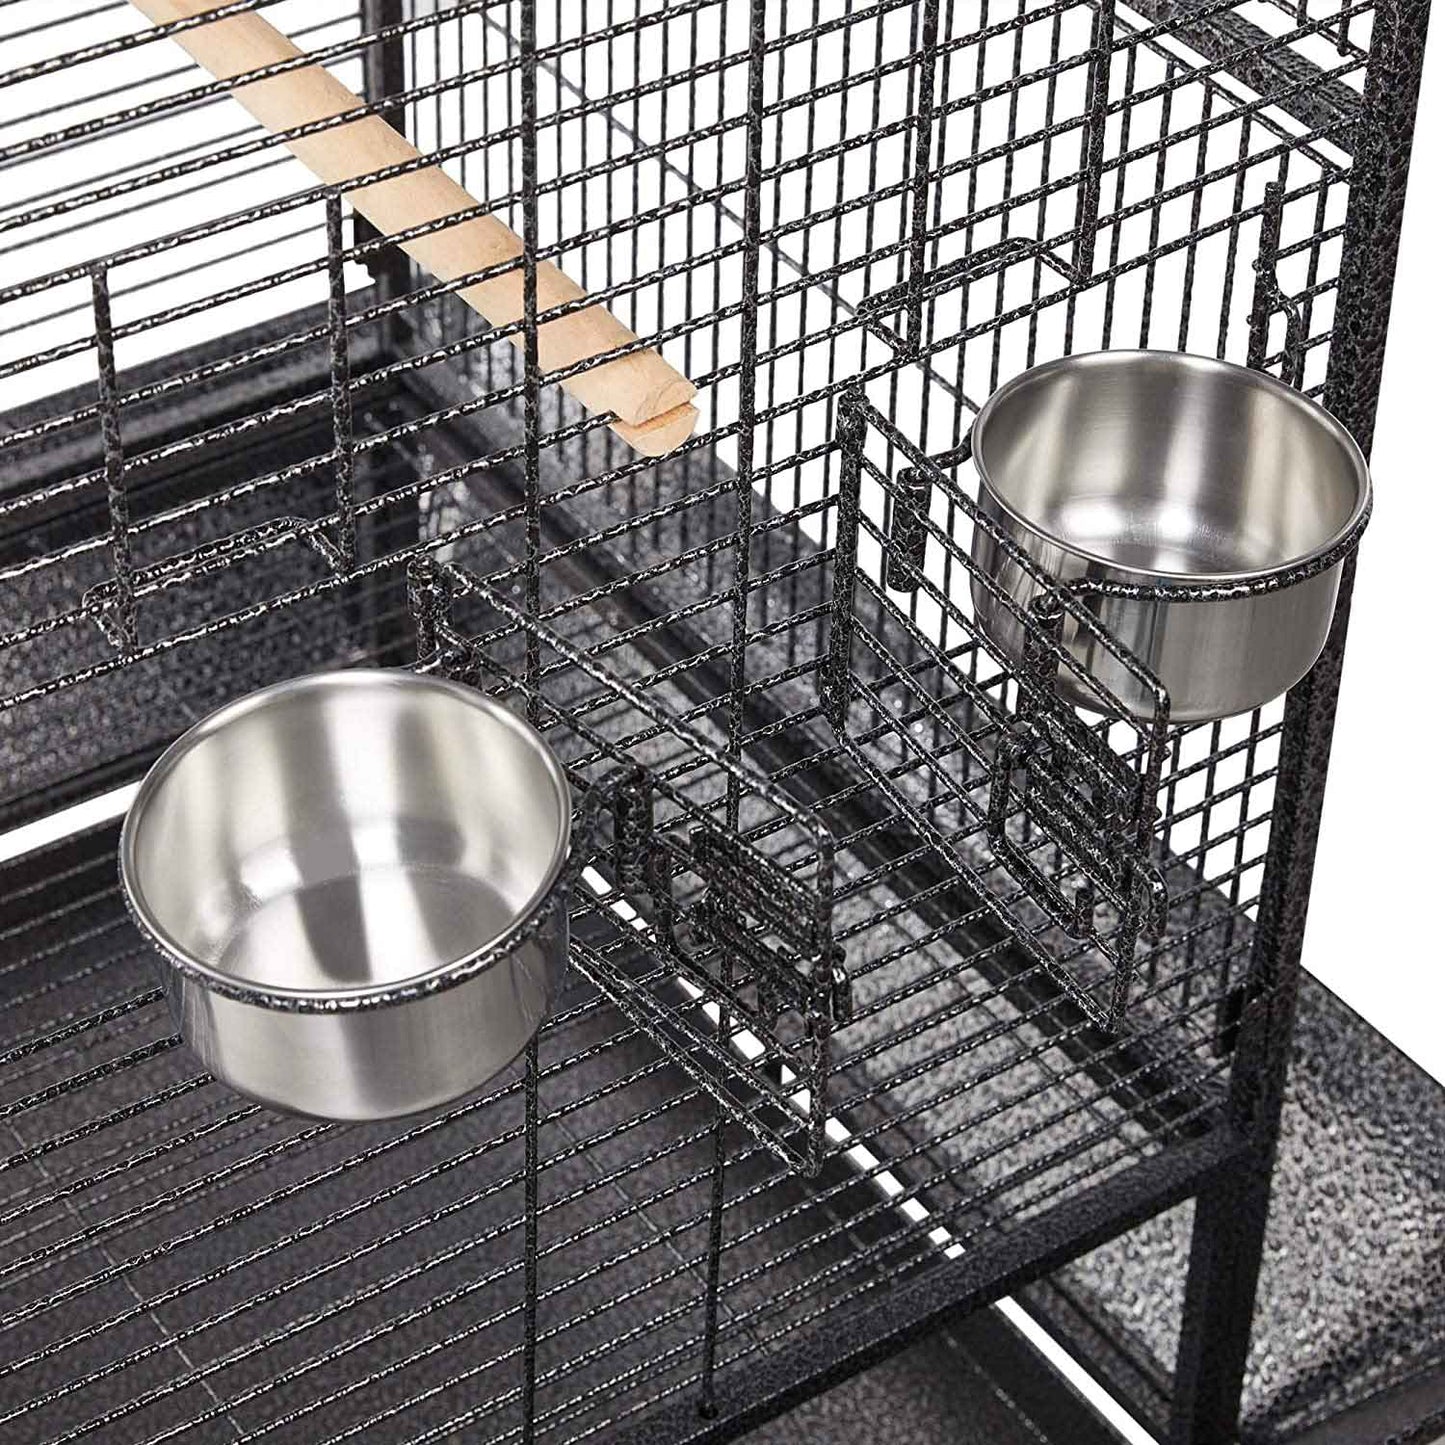 174cm Large Rolling Mobile Bird Cage Birdcage Finch Aviary Parrot Animals Playtop Stand Canary Finch